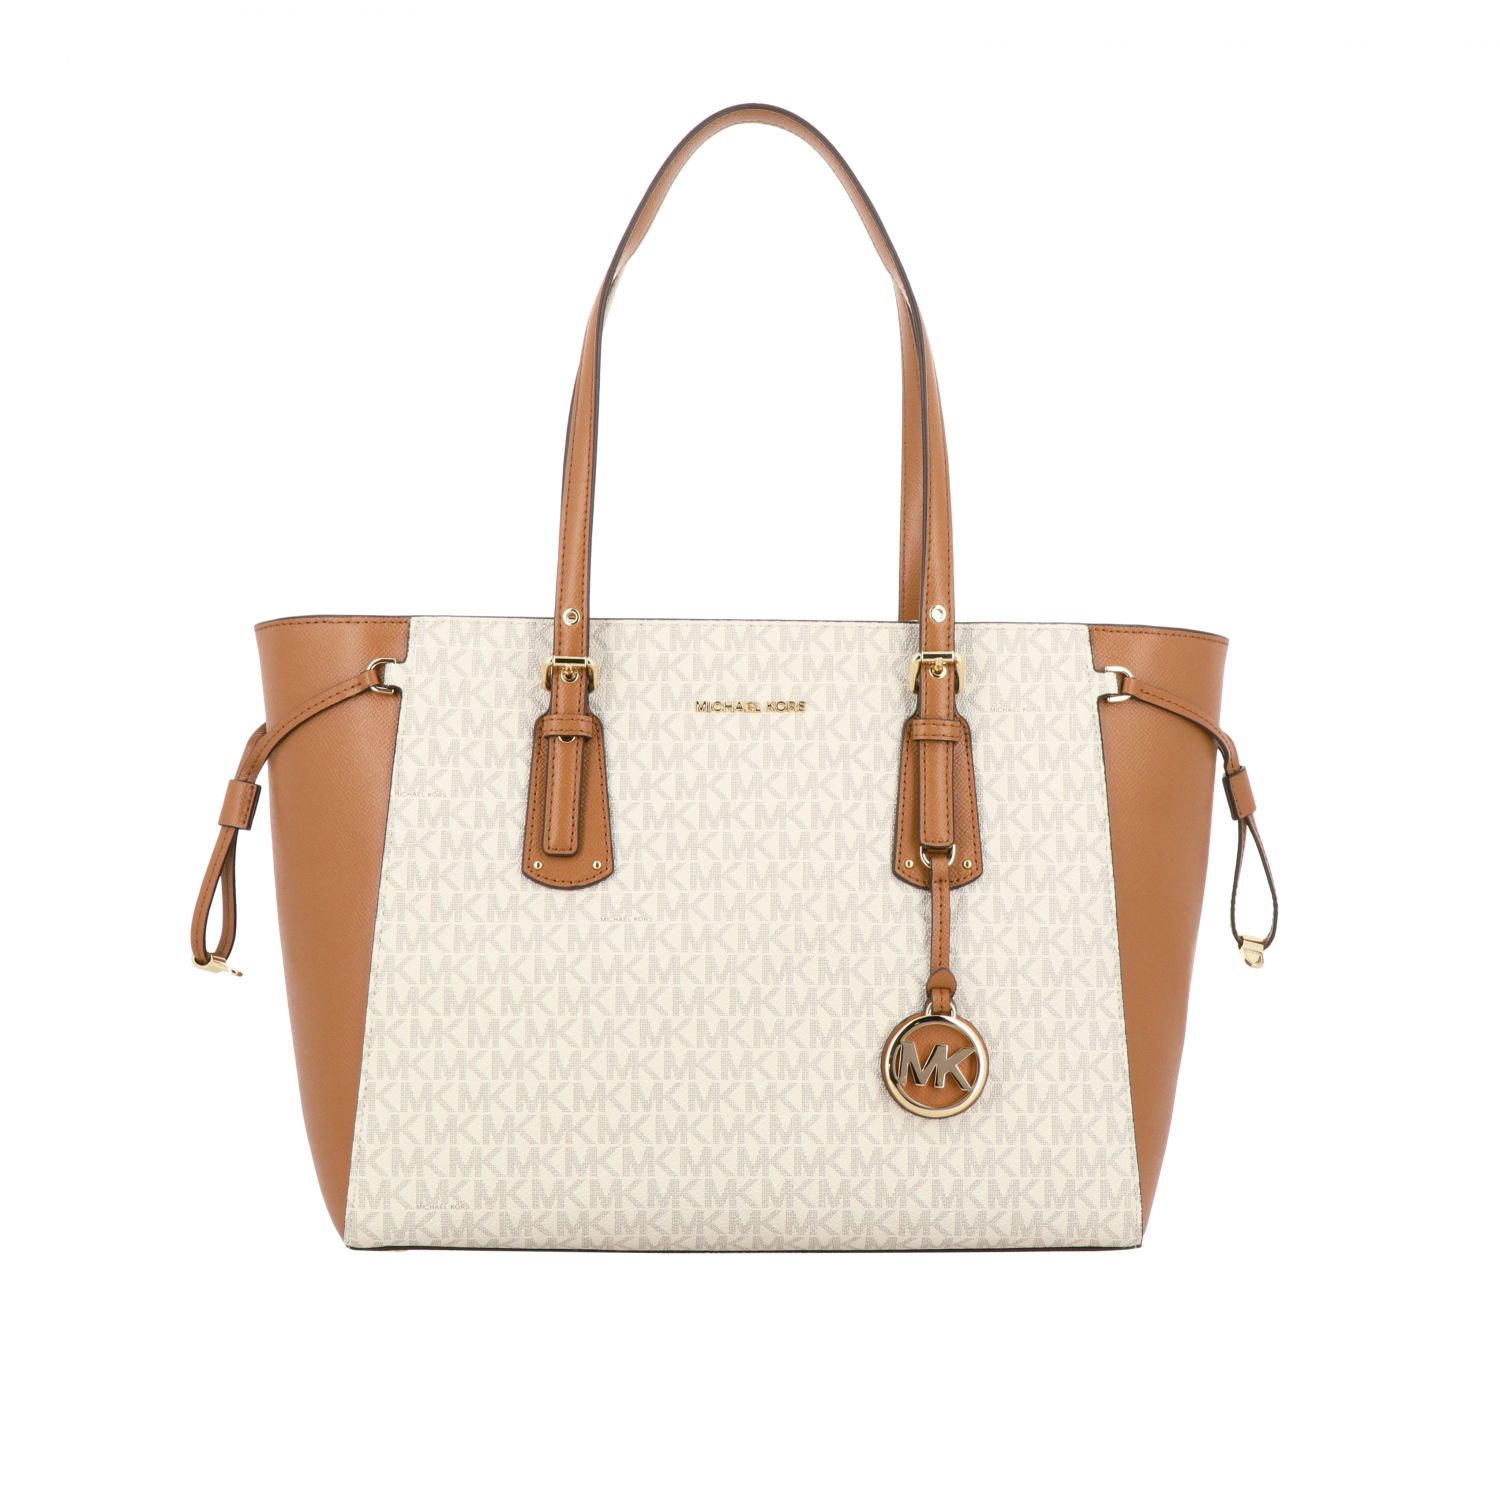 michael kors bag with mk all over it